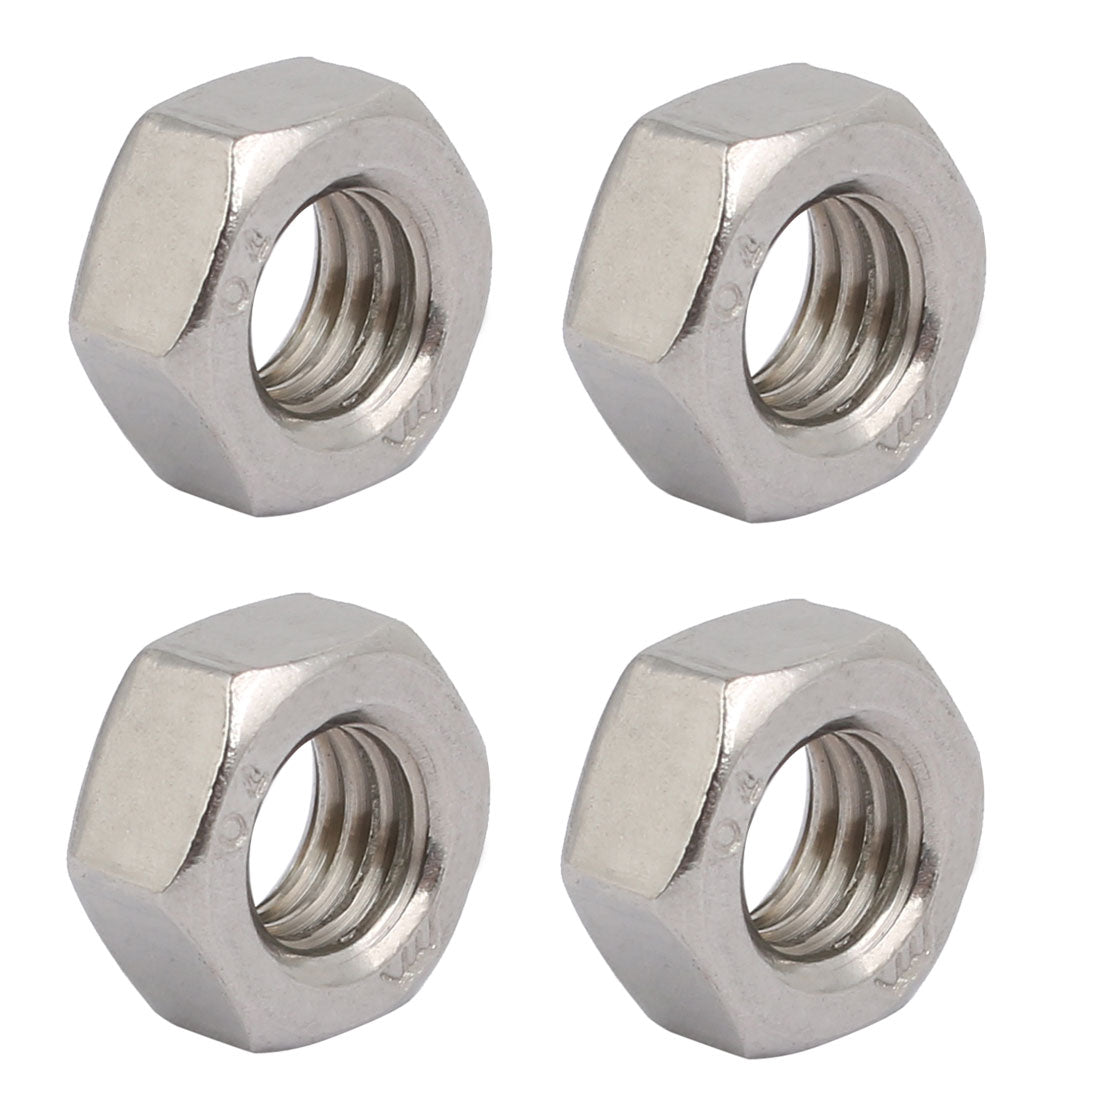 uxcell Uxcell 4pcs M8 x 1.25mm Pitch Metric Thread 201 Stainless Steel Left Hand Hex Nuts